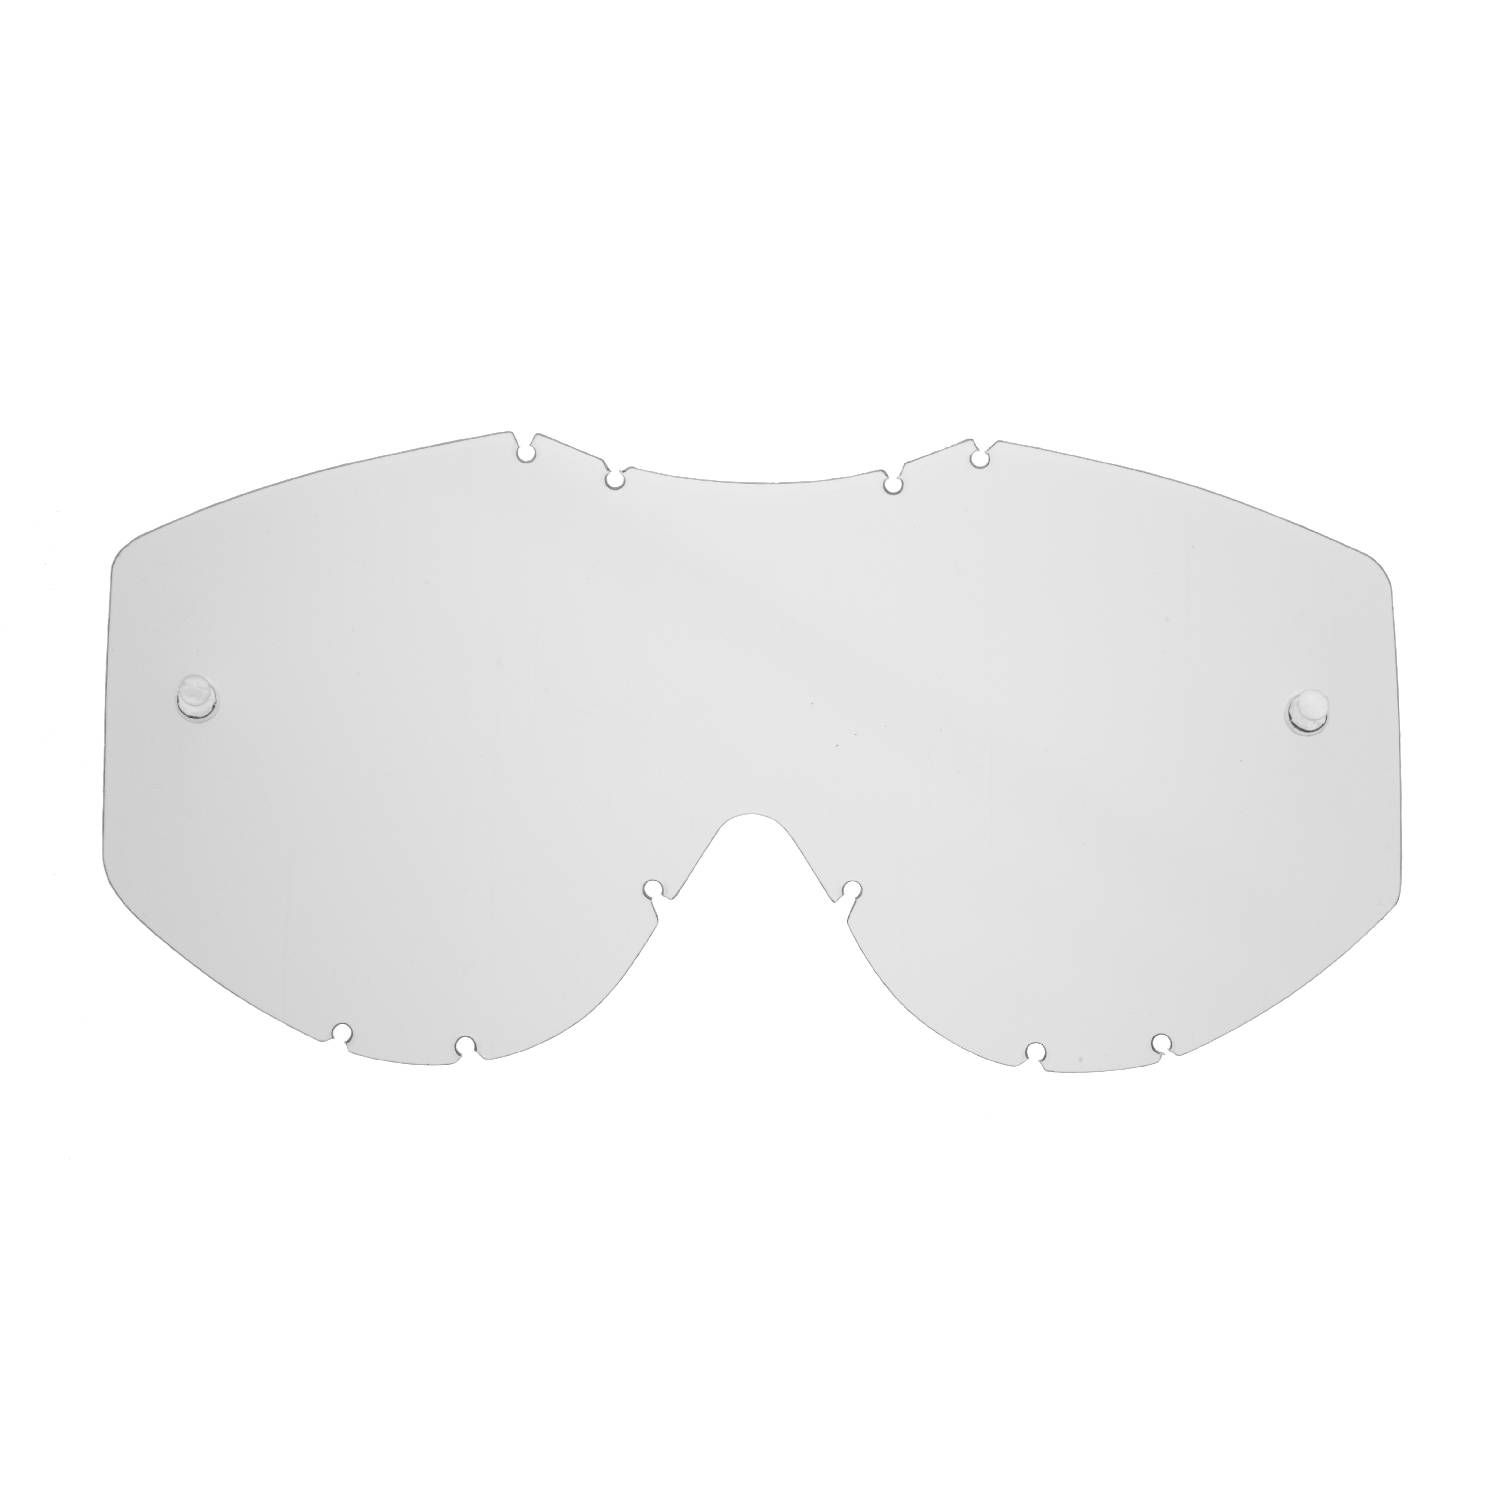 clear replacement lenses for goggles compatible for Uvex Mx goggle